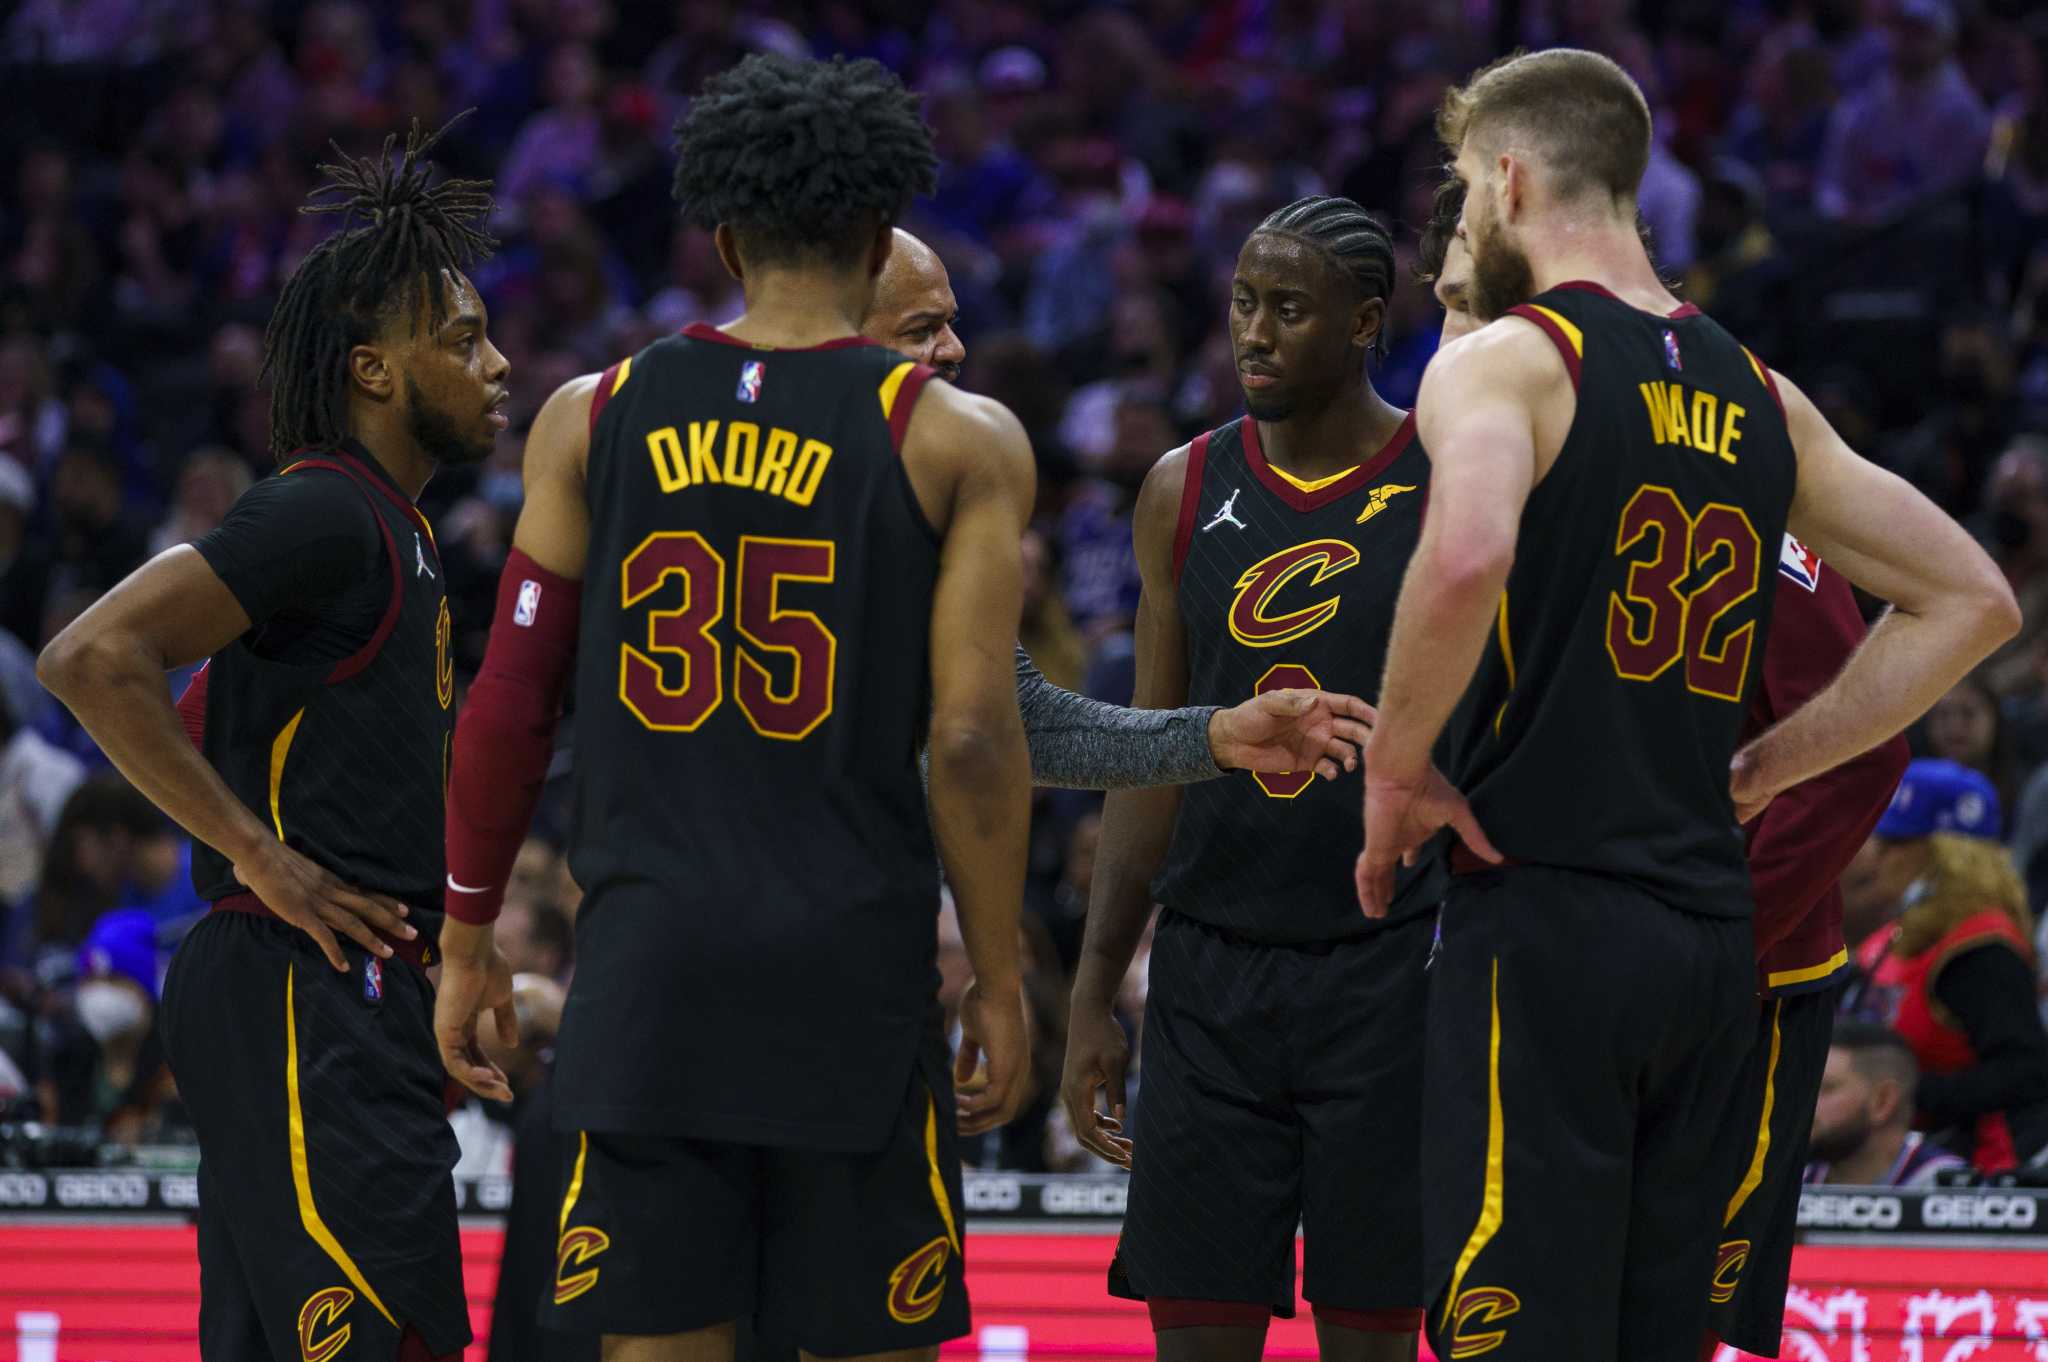 Cavs Organization Represented Well During All-Star Weekend